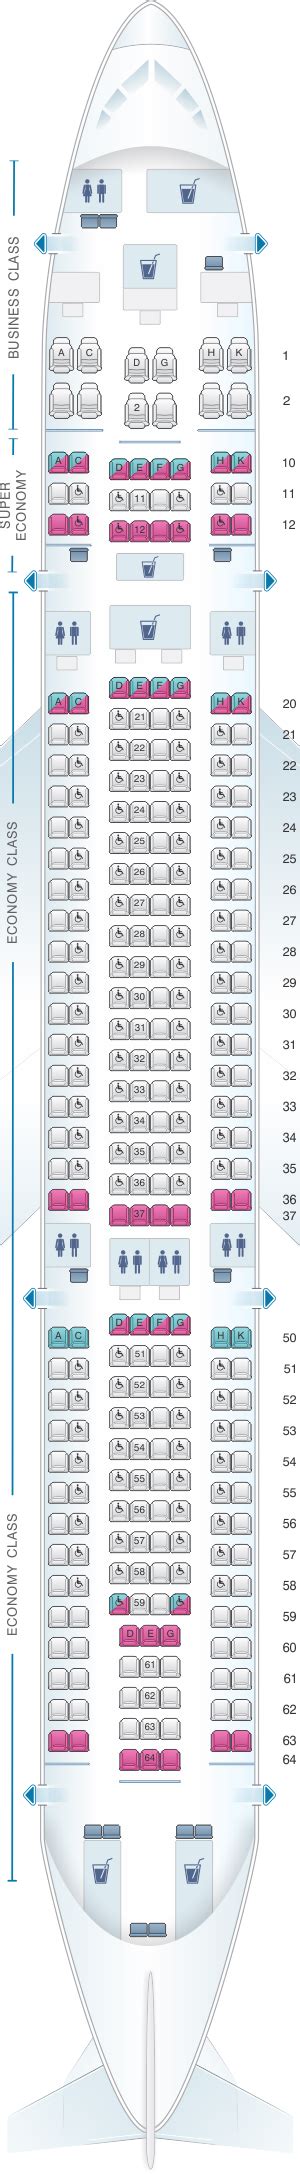 Seat Map Srilankan Airlines Airbus A330 200 Config 2